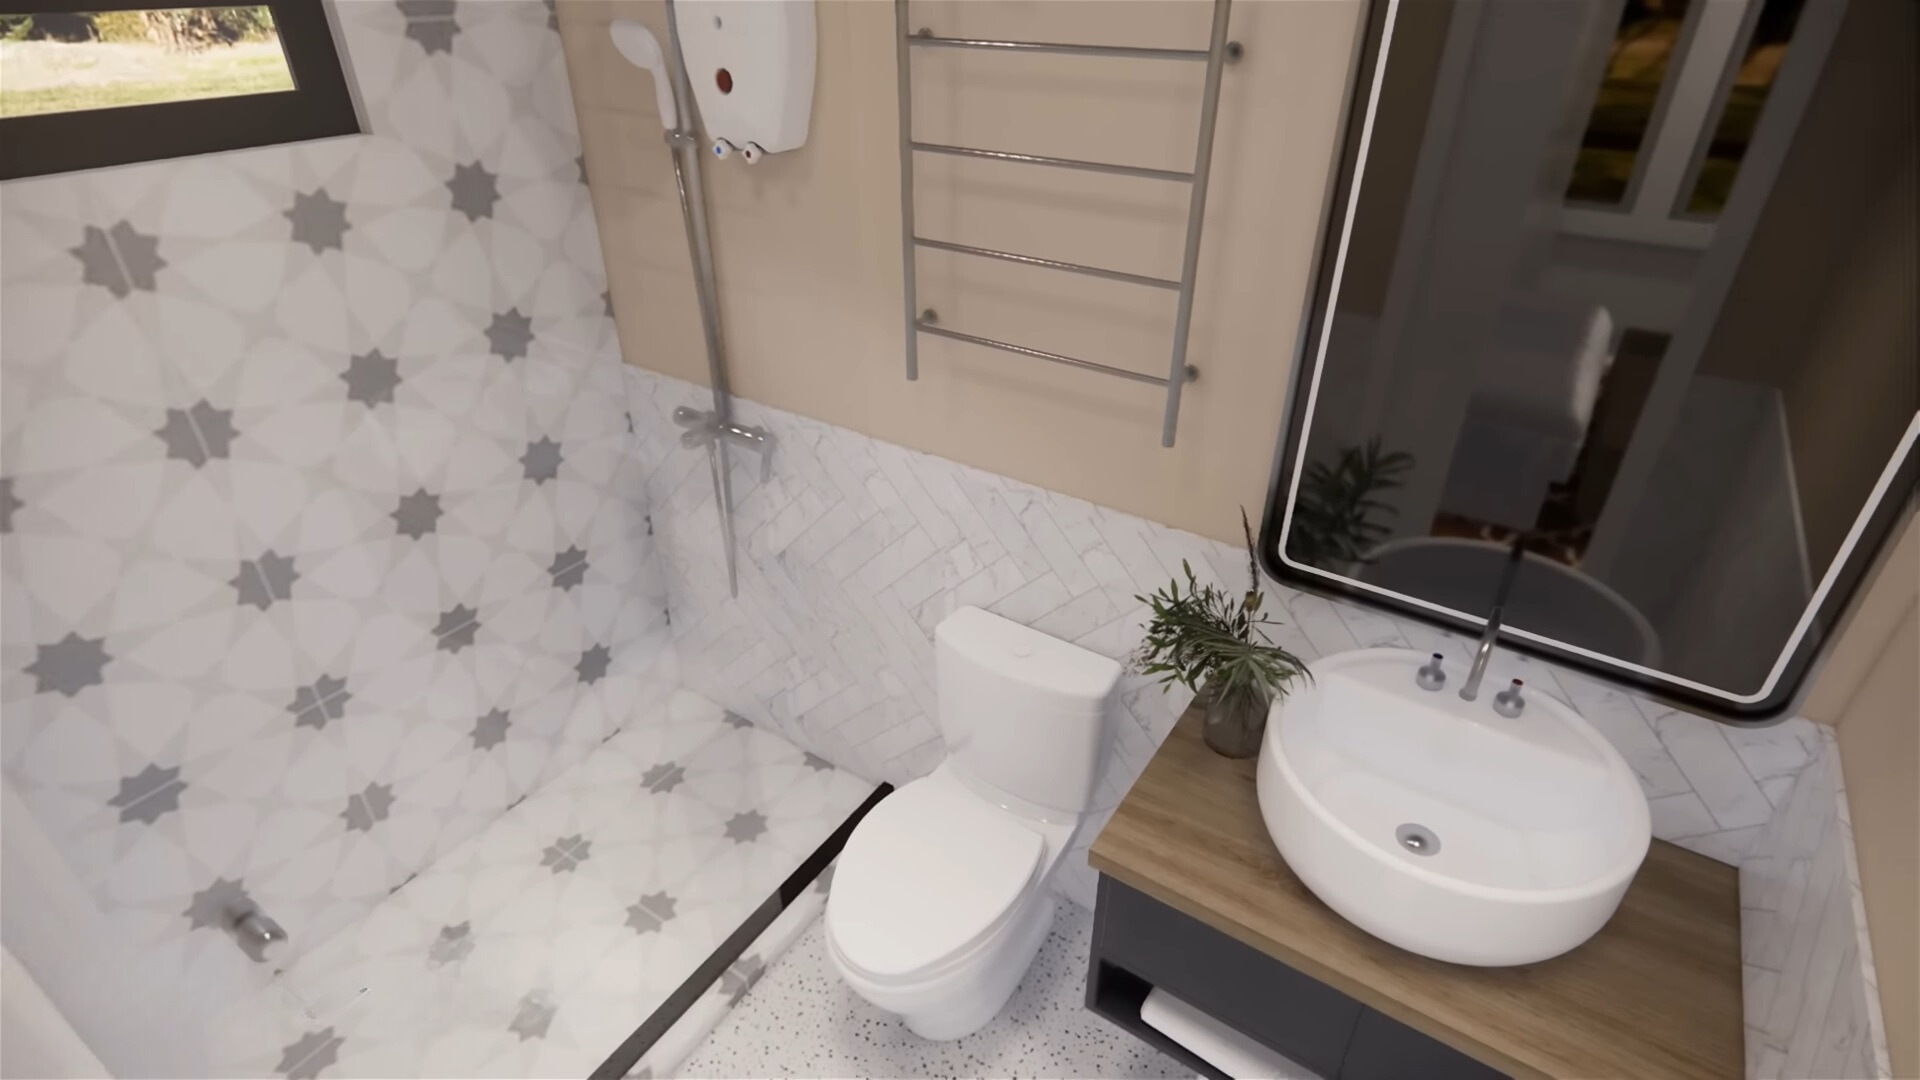 bathroom with a glass shower, toilet, little cabinet with a sink, patterned tiles